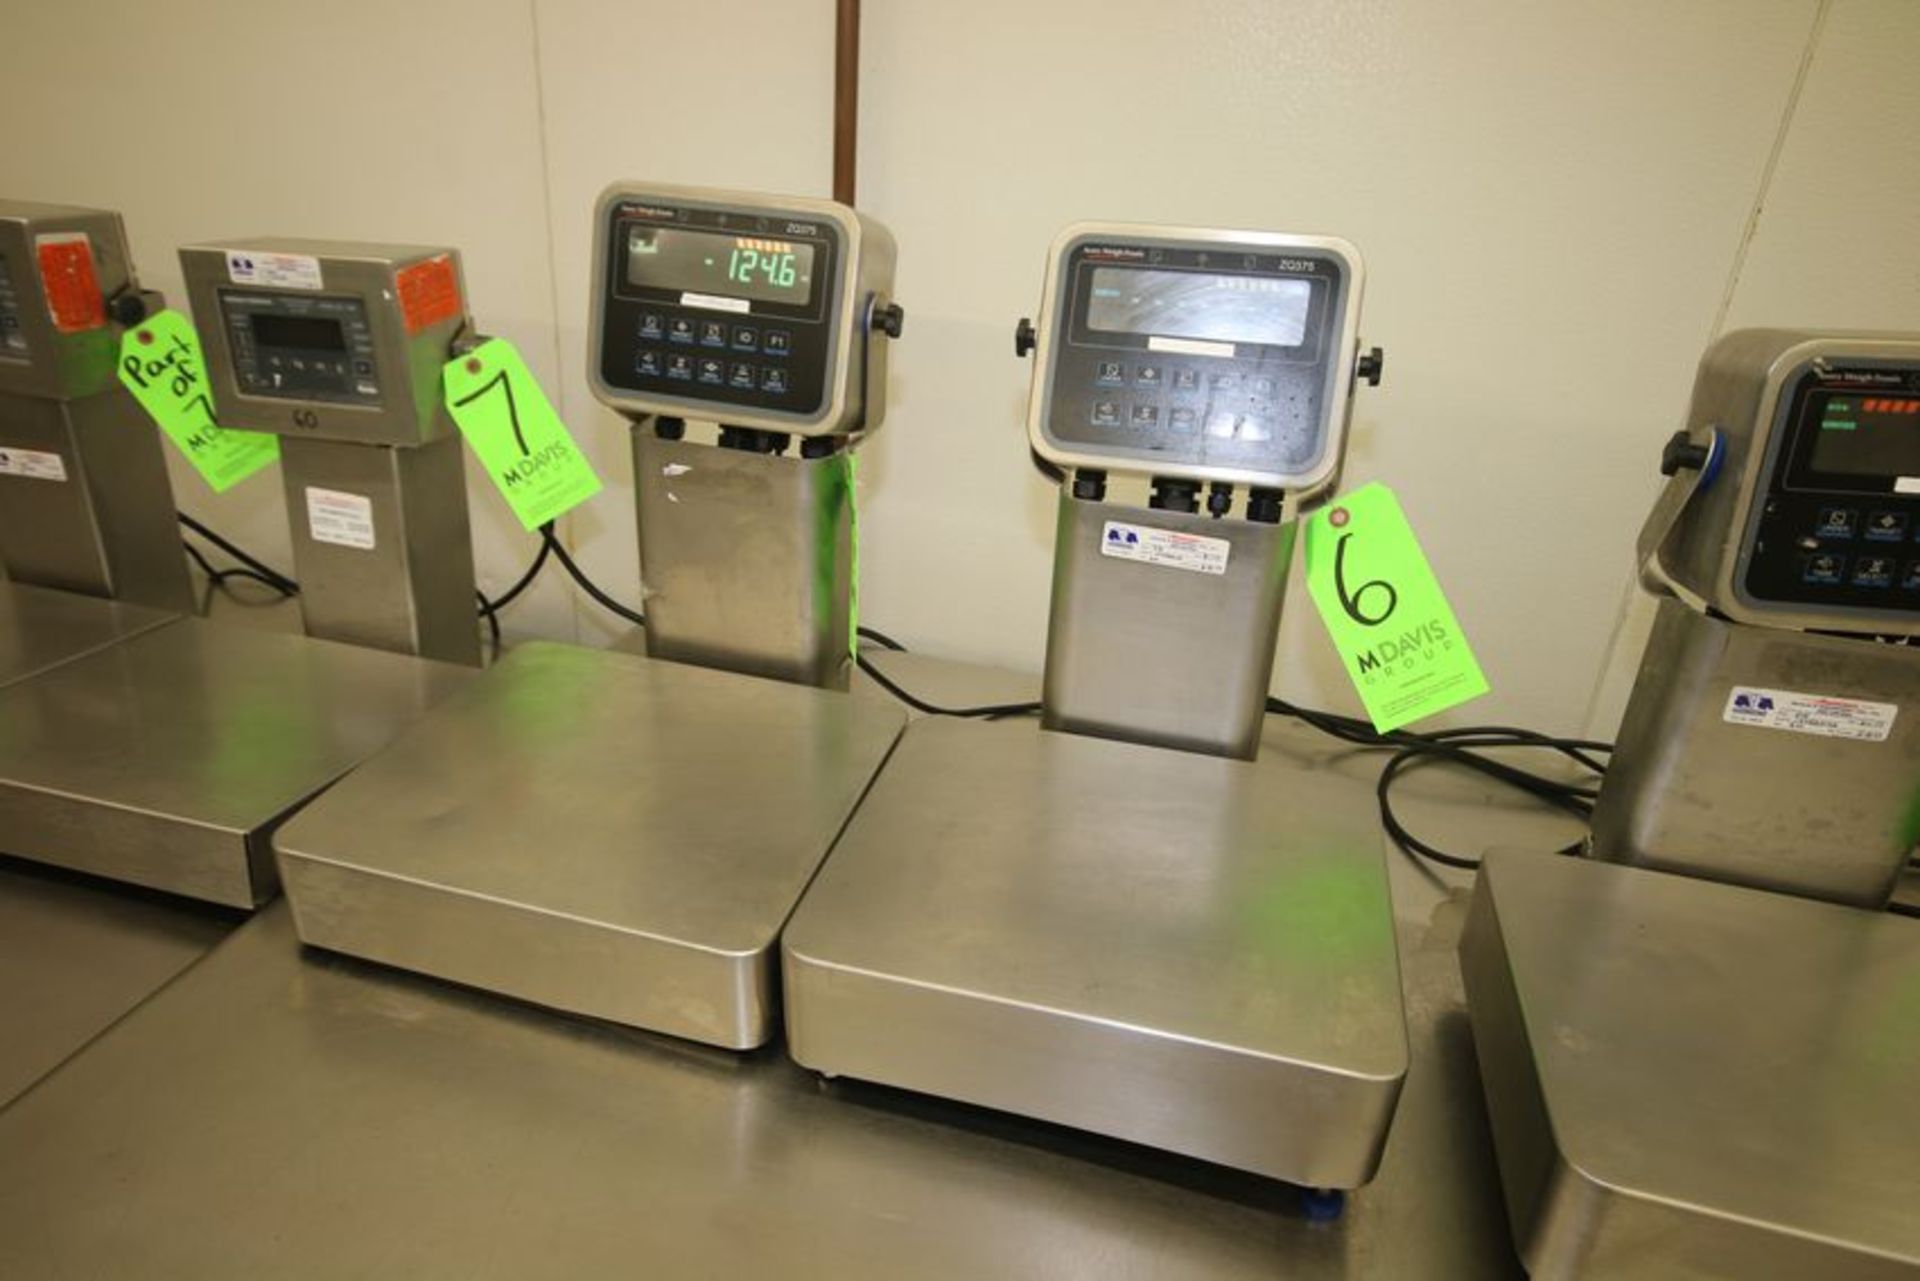 Avery Weigh-Tronix Digital Scales, Model ZQ375, S/N 144550670 and S/N 144550657 with 13-1/2" x 12"